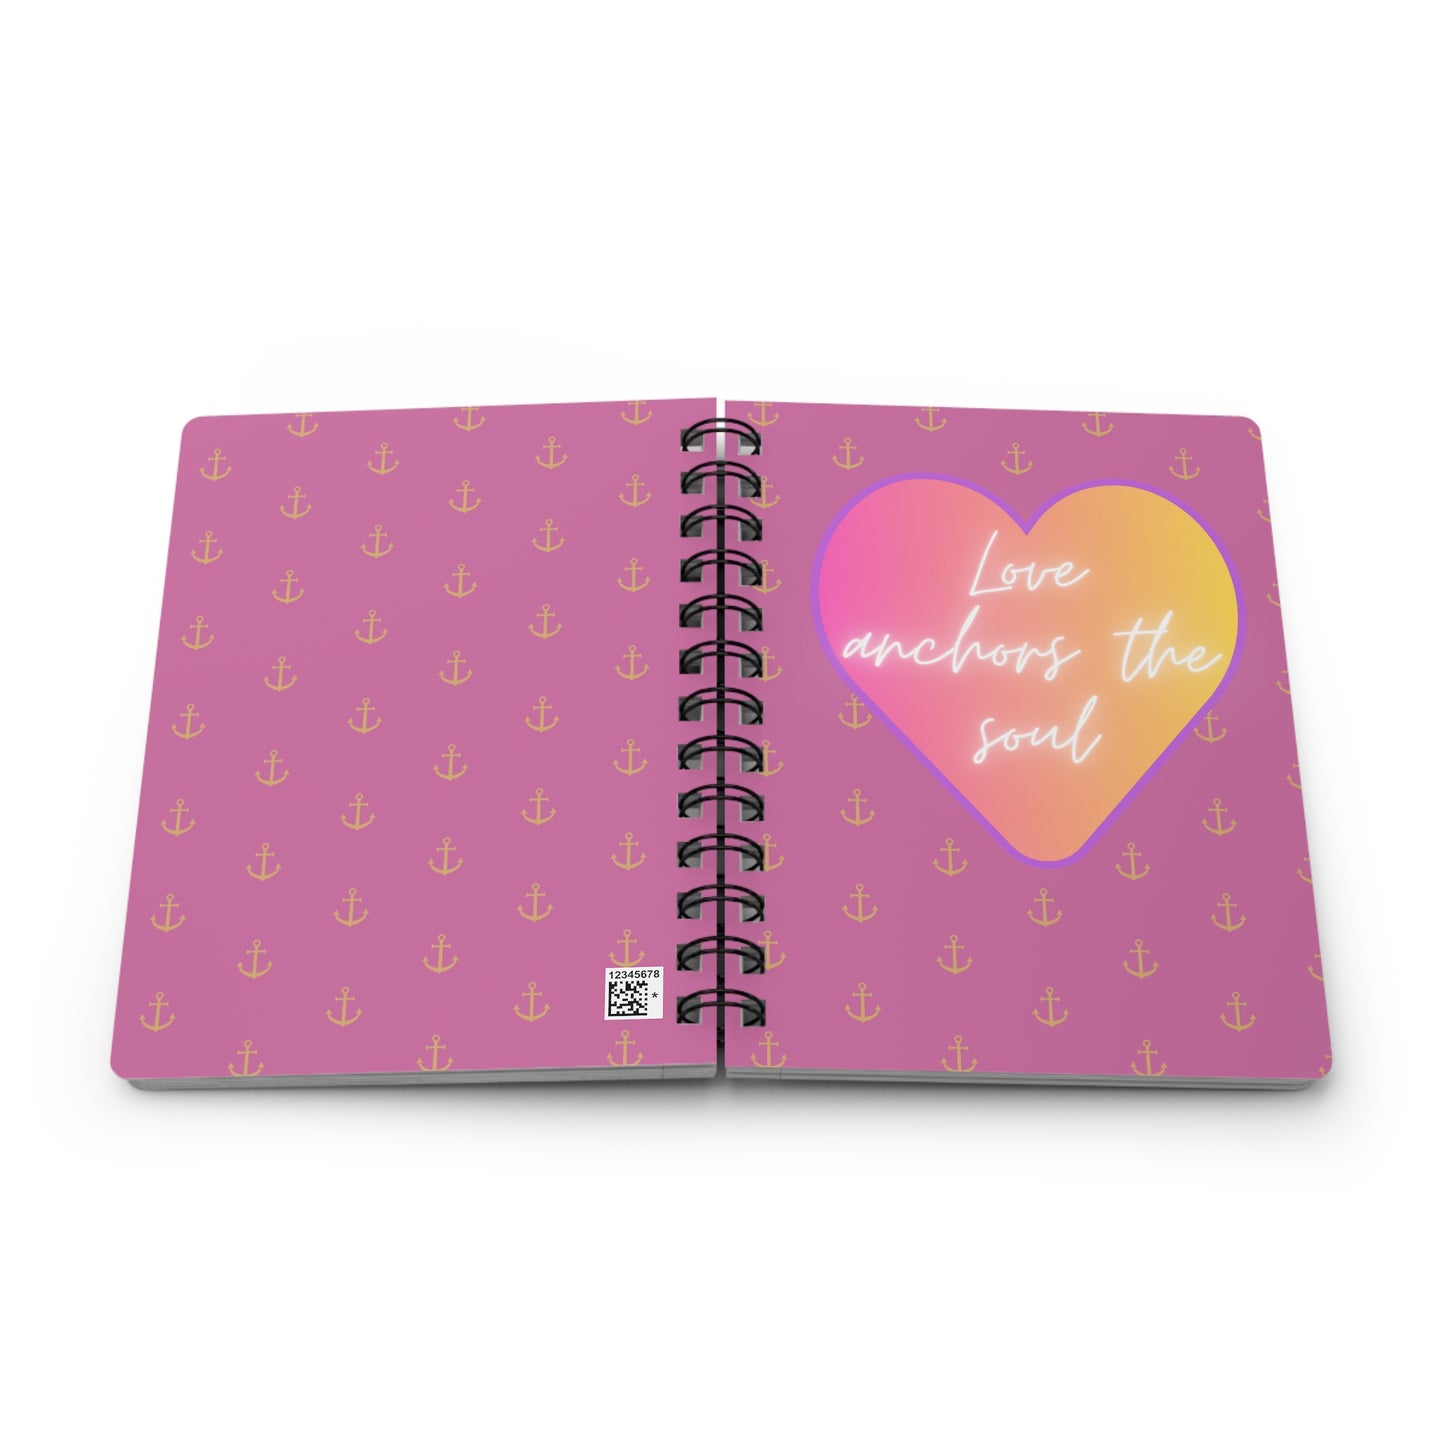 Love anchors the soul - Spiral Bound Journal (Light pink)